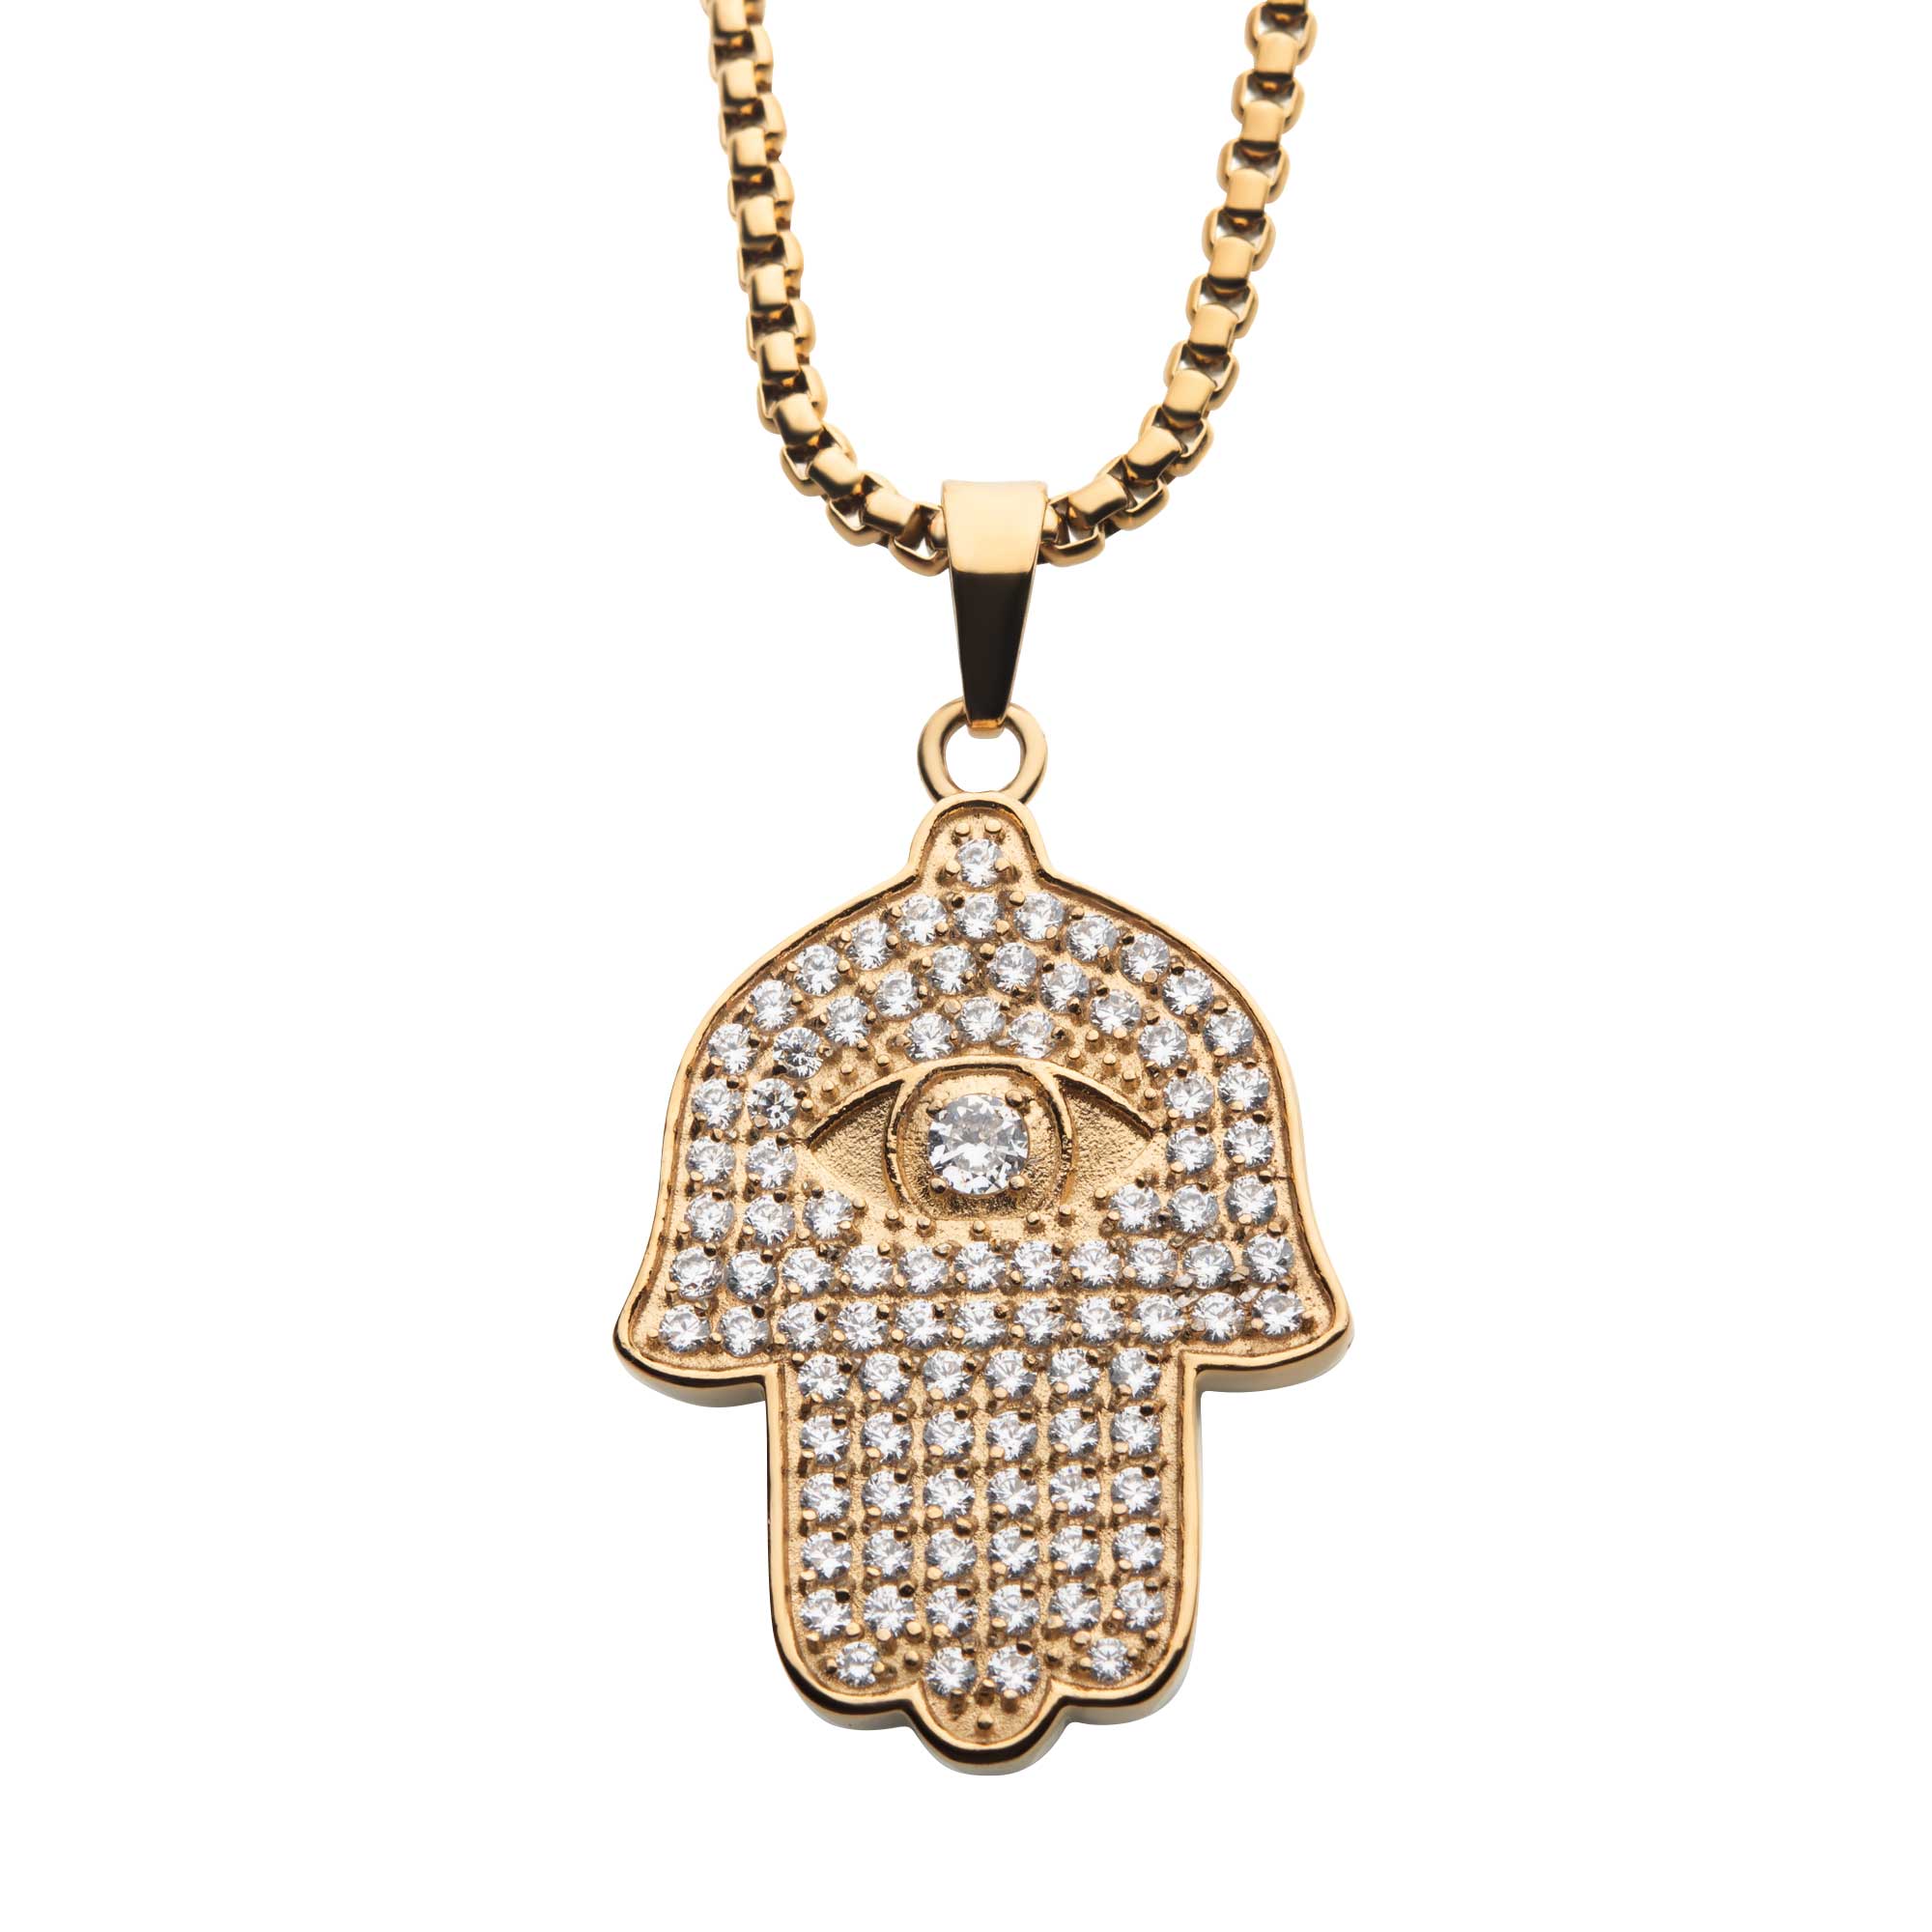 18K Gold Plated with 94pcs CNC Prong Set Clear CZ Hamsa Pendant, with Gold Plated Box Chain Jayson Jewelers Cape Girardeau, MO